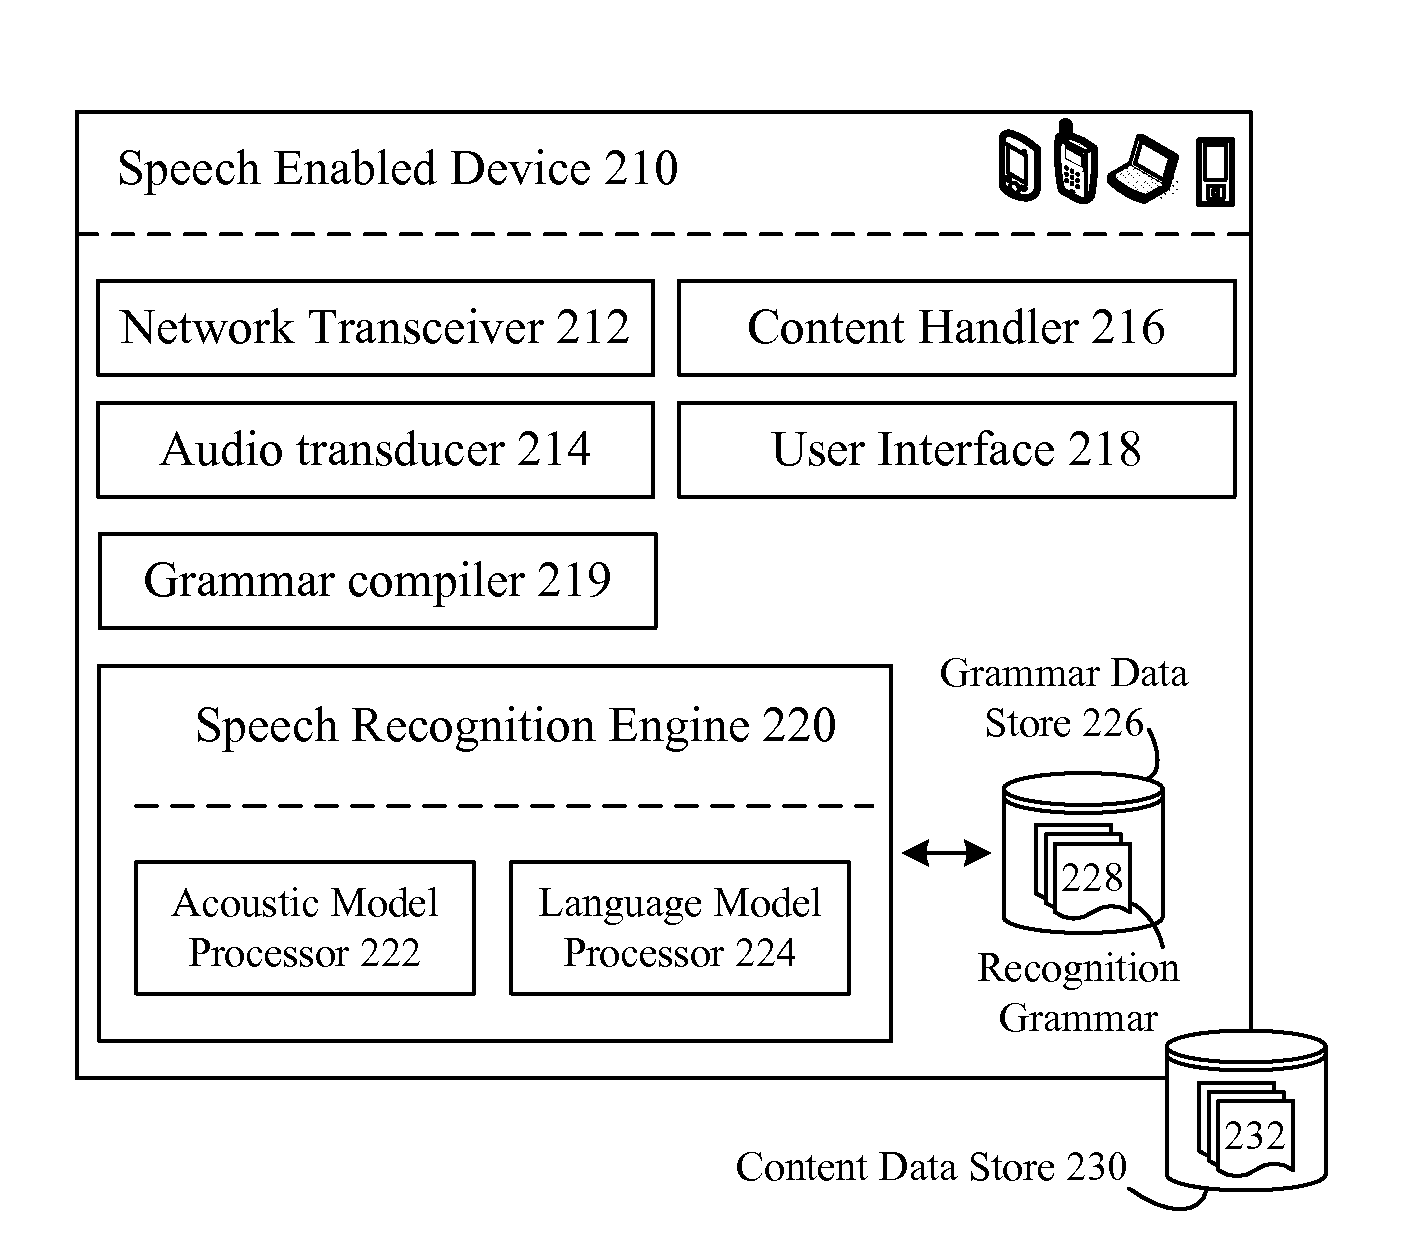 Reducing a size of a compiled speech recognition grammar